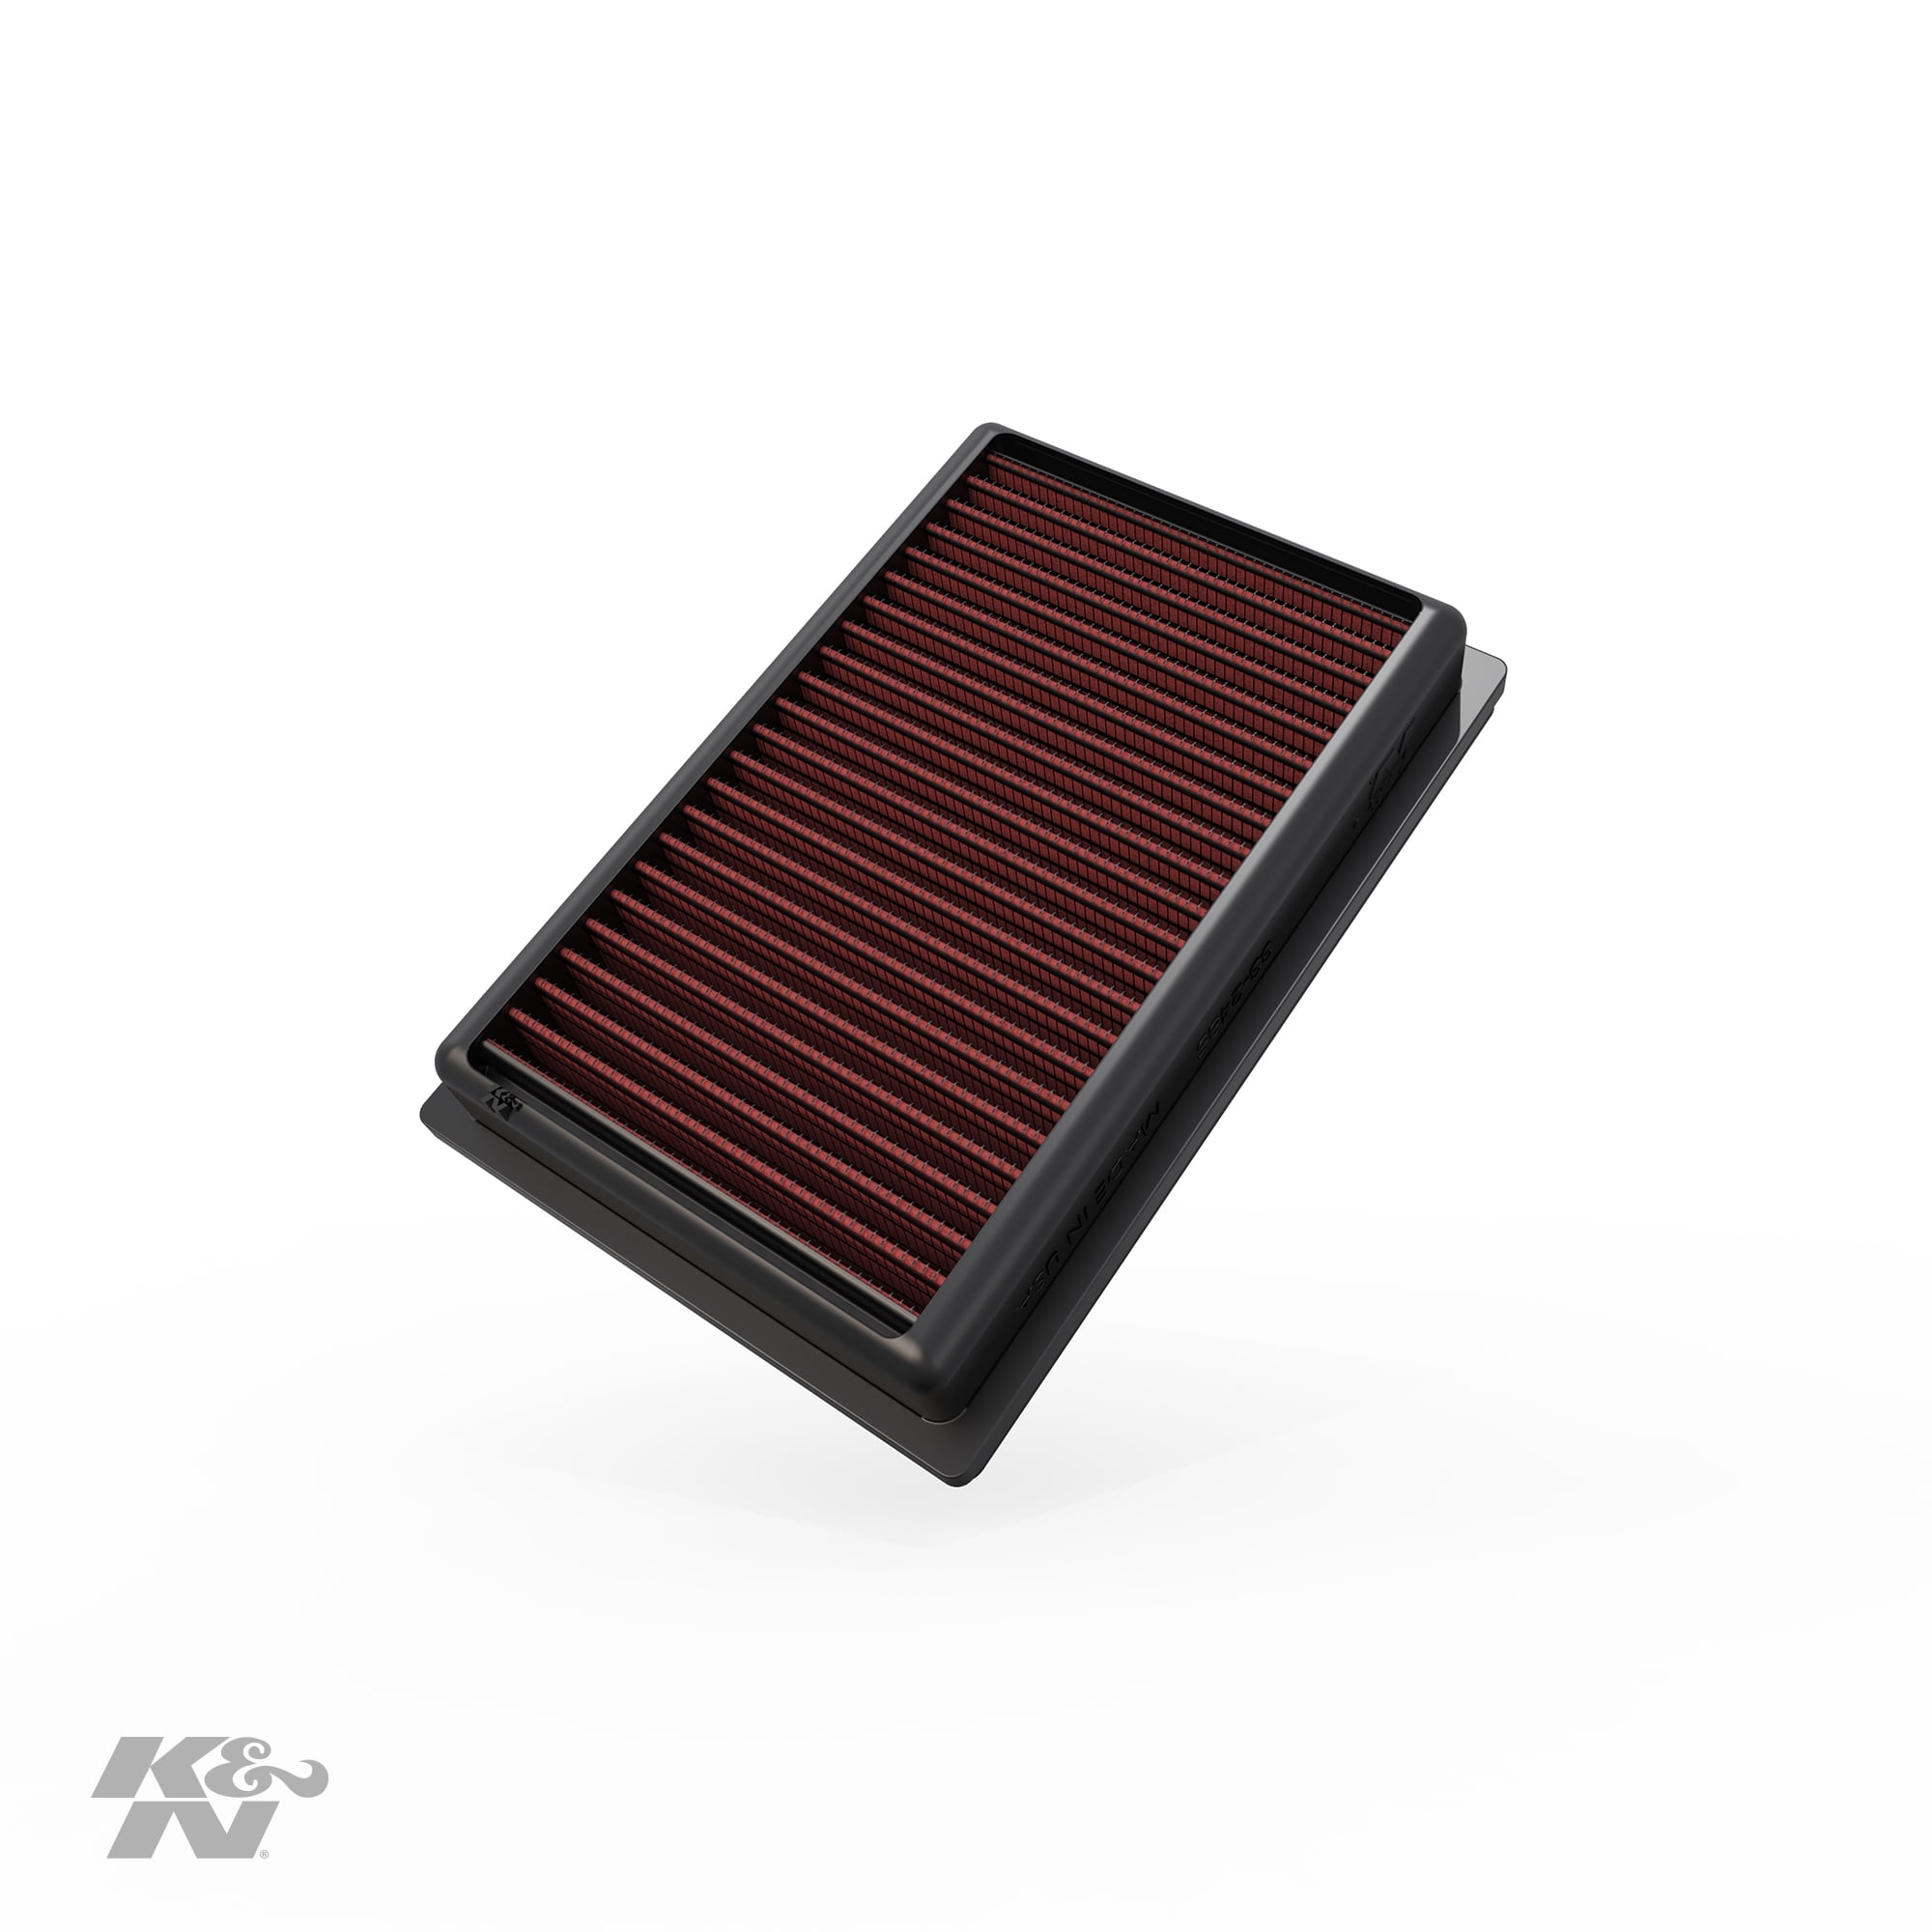 K&N Engine Air Filter: Reusable, Clean Every 75,000 Miles, Washable,  Premium, Replacement Car Air Filter: Compatible with 2019-2022 Toyota/Lexus